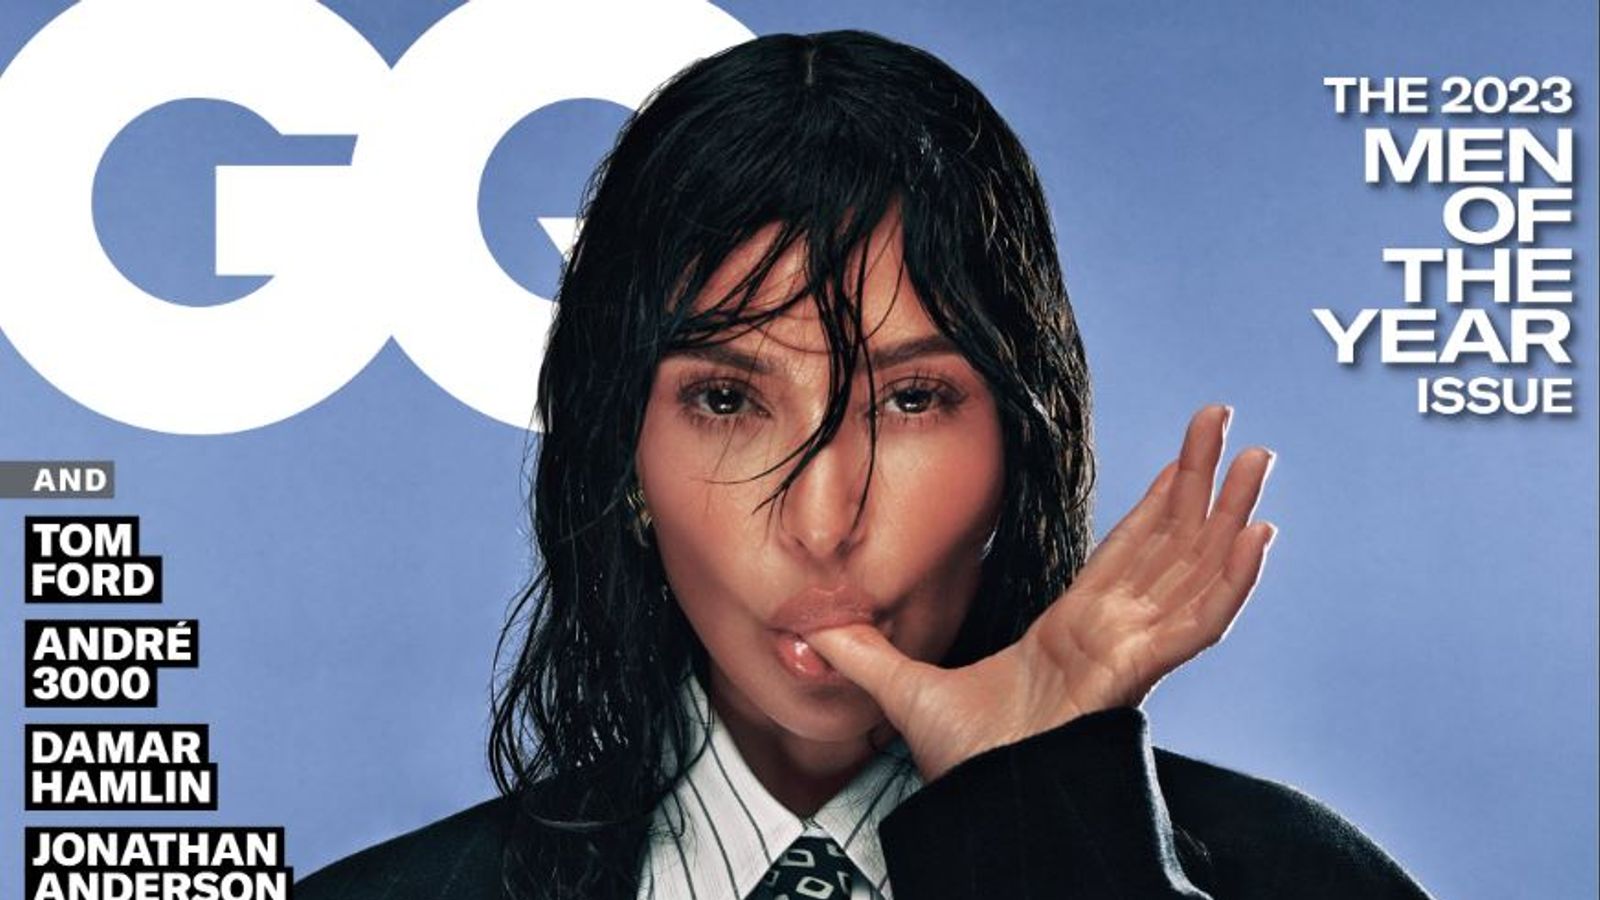 Kim Kardashian named one of GQ's 'Men Of The Year' for 2023 | Ents ...